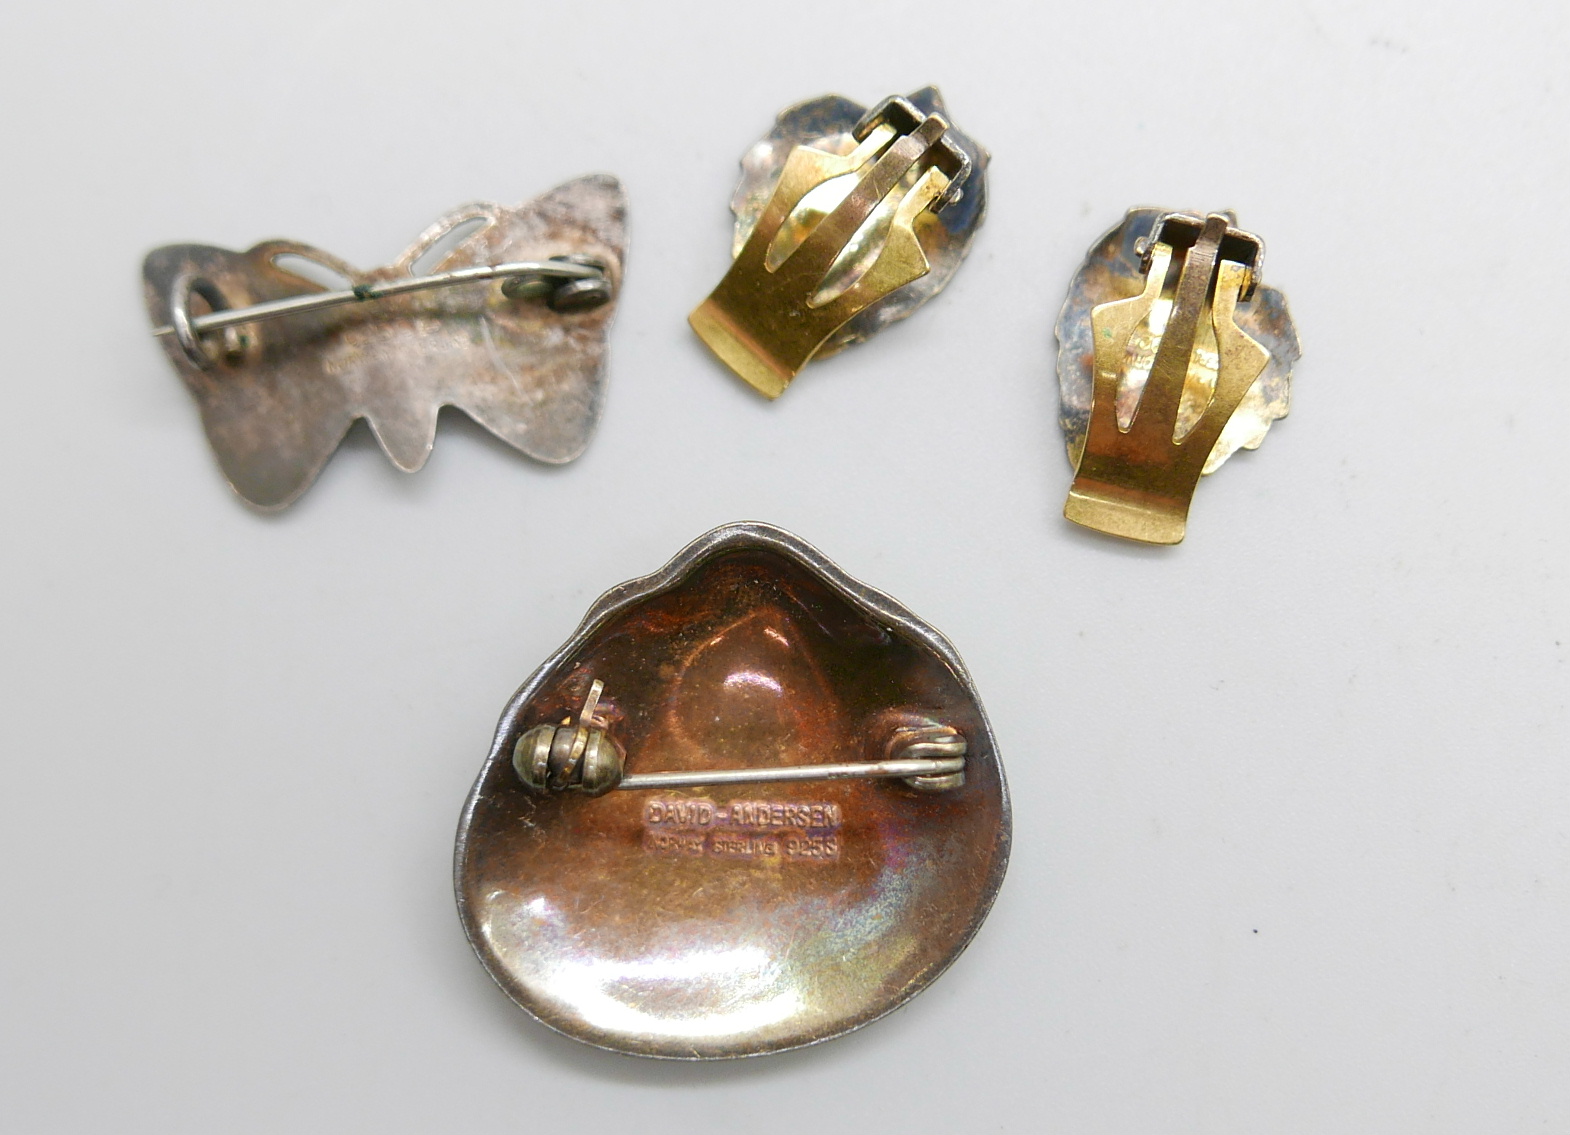 Norwegian silver and enamelled jewellery, a shell shaped brooch marked David Andersen, a pair of - Image 2 of 4